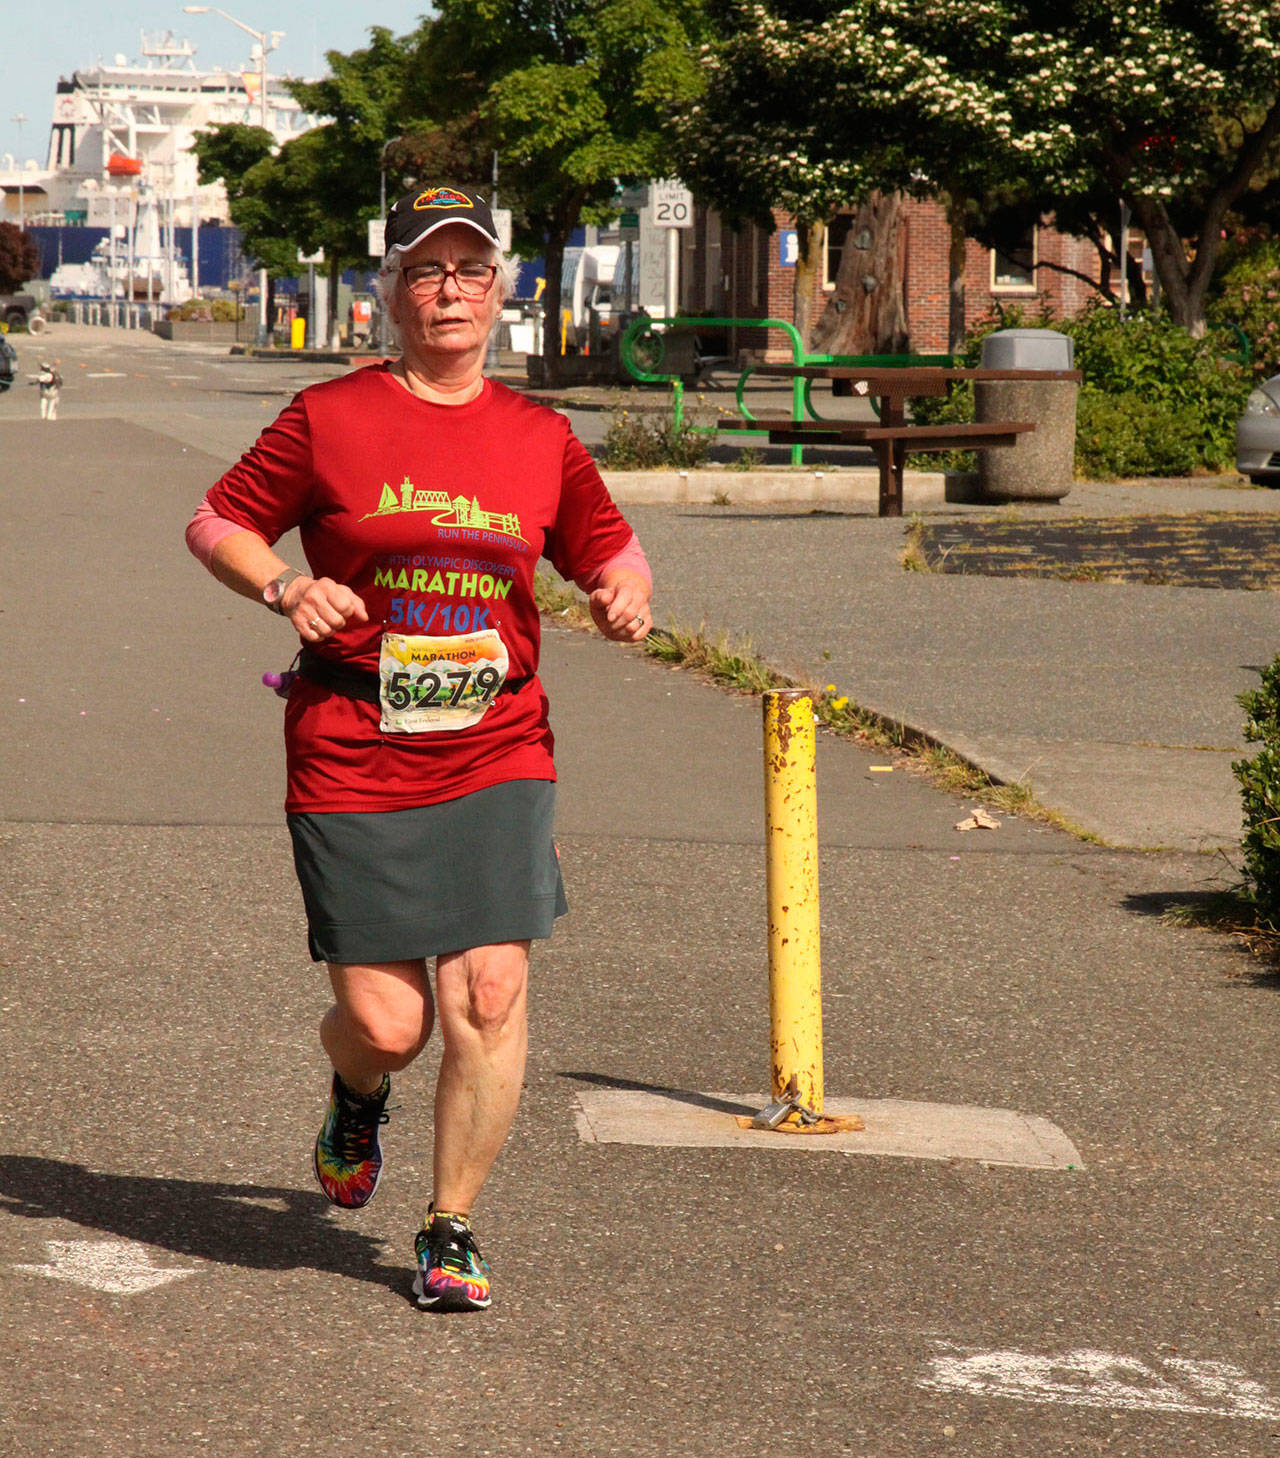 Dave Logan/for Peninsula Daily News Norma Humphreys of Tacoma starts her 5K run at the Port Angeles Pier on Sunday morning as part of the North Olympic Discovery Marathon virtual event.